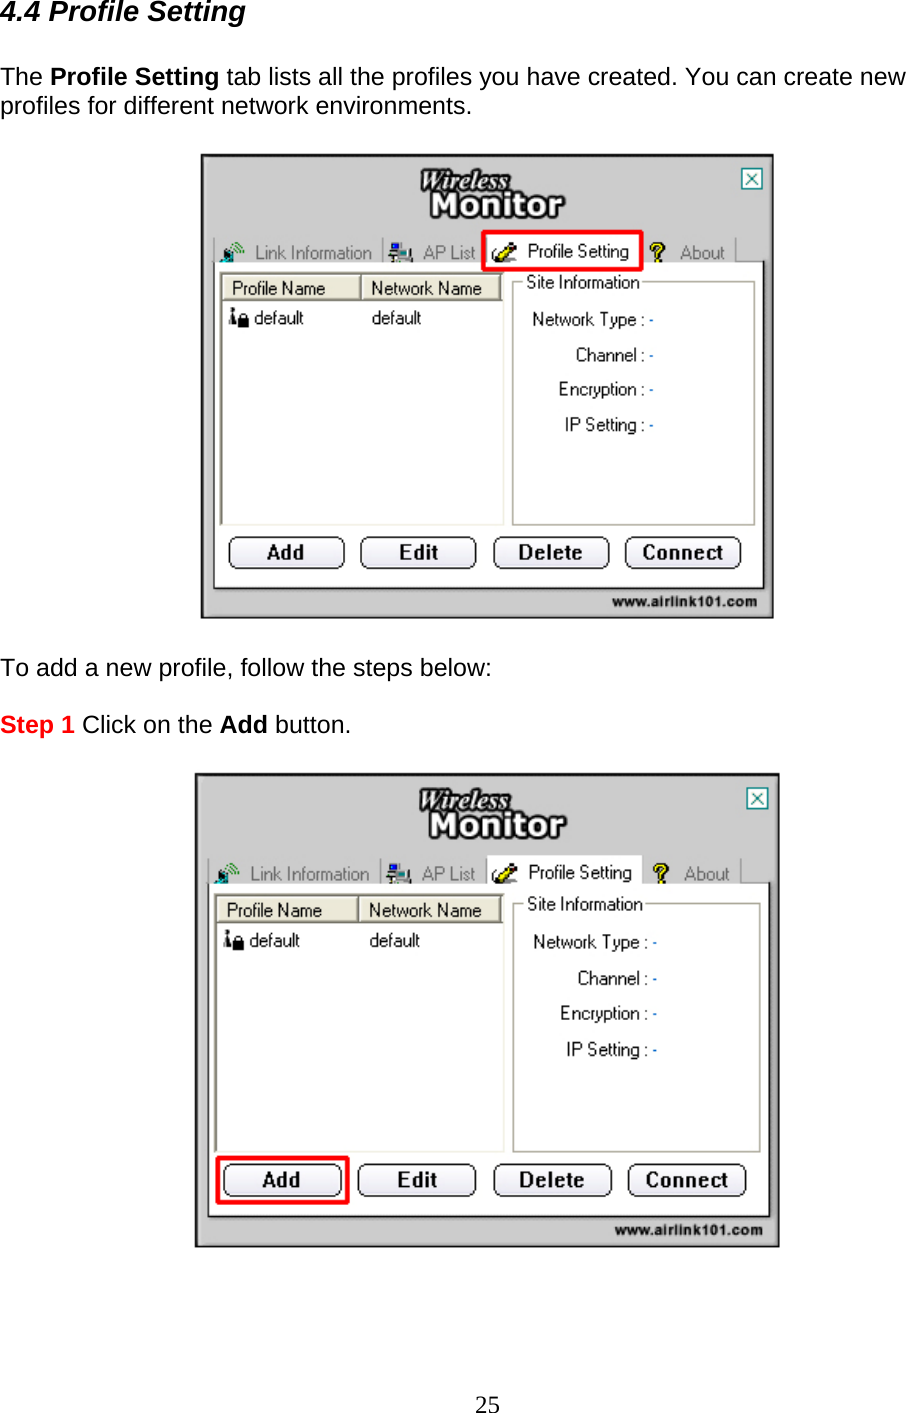 25 4.4 Profile Setting  The Profile Setting tab lists all the profiles you have created. You can create new profiles for different network environments.    To add a new profile, follow the steps below:  Step 1 Click on the Add button.      